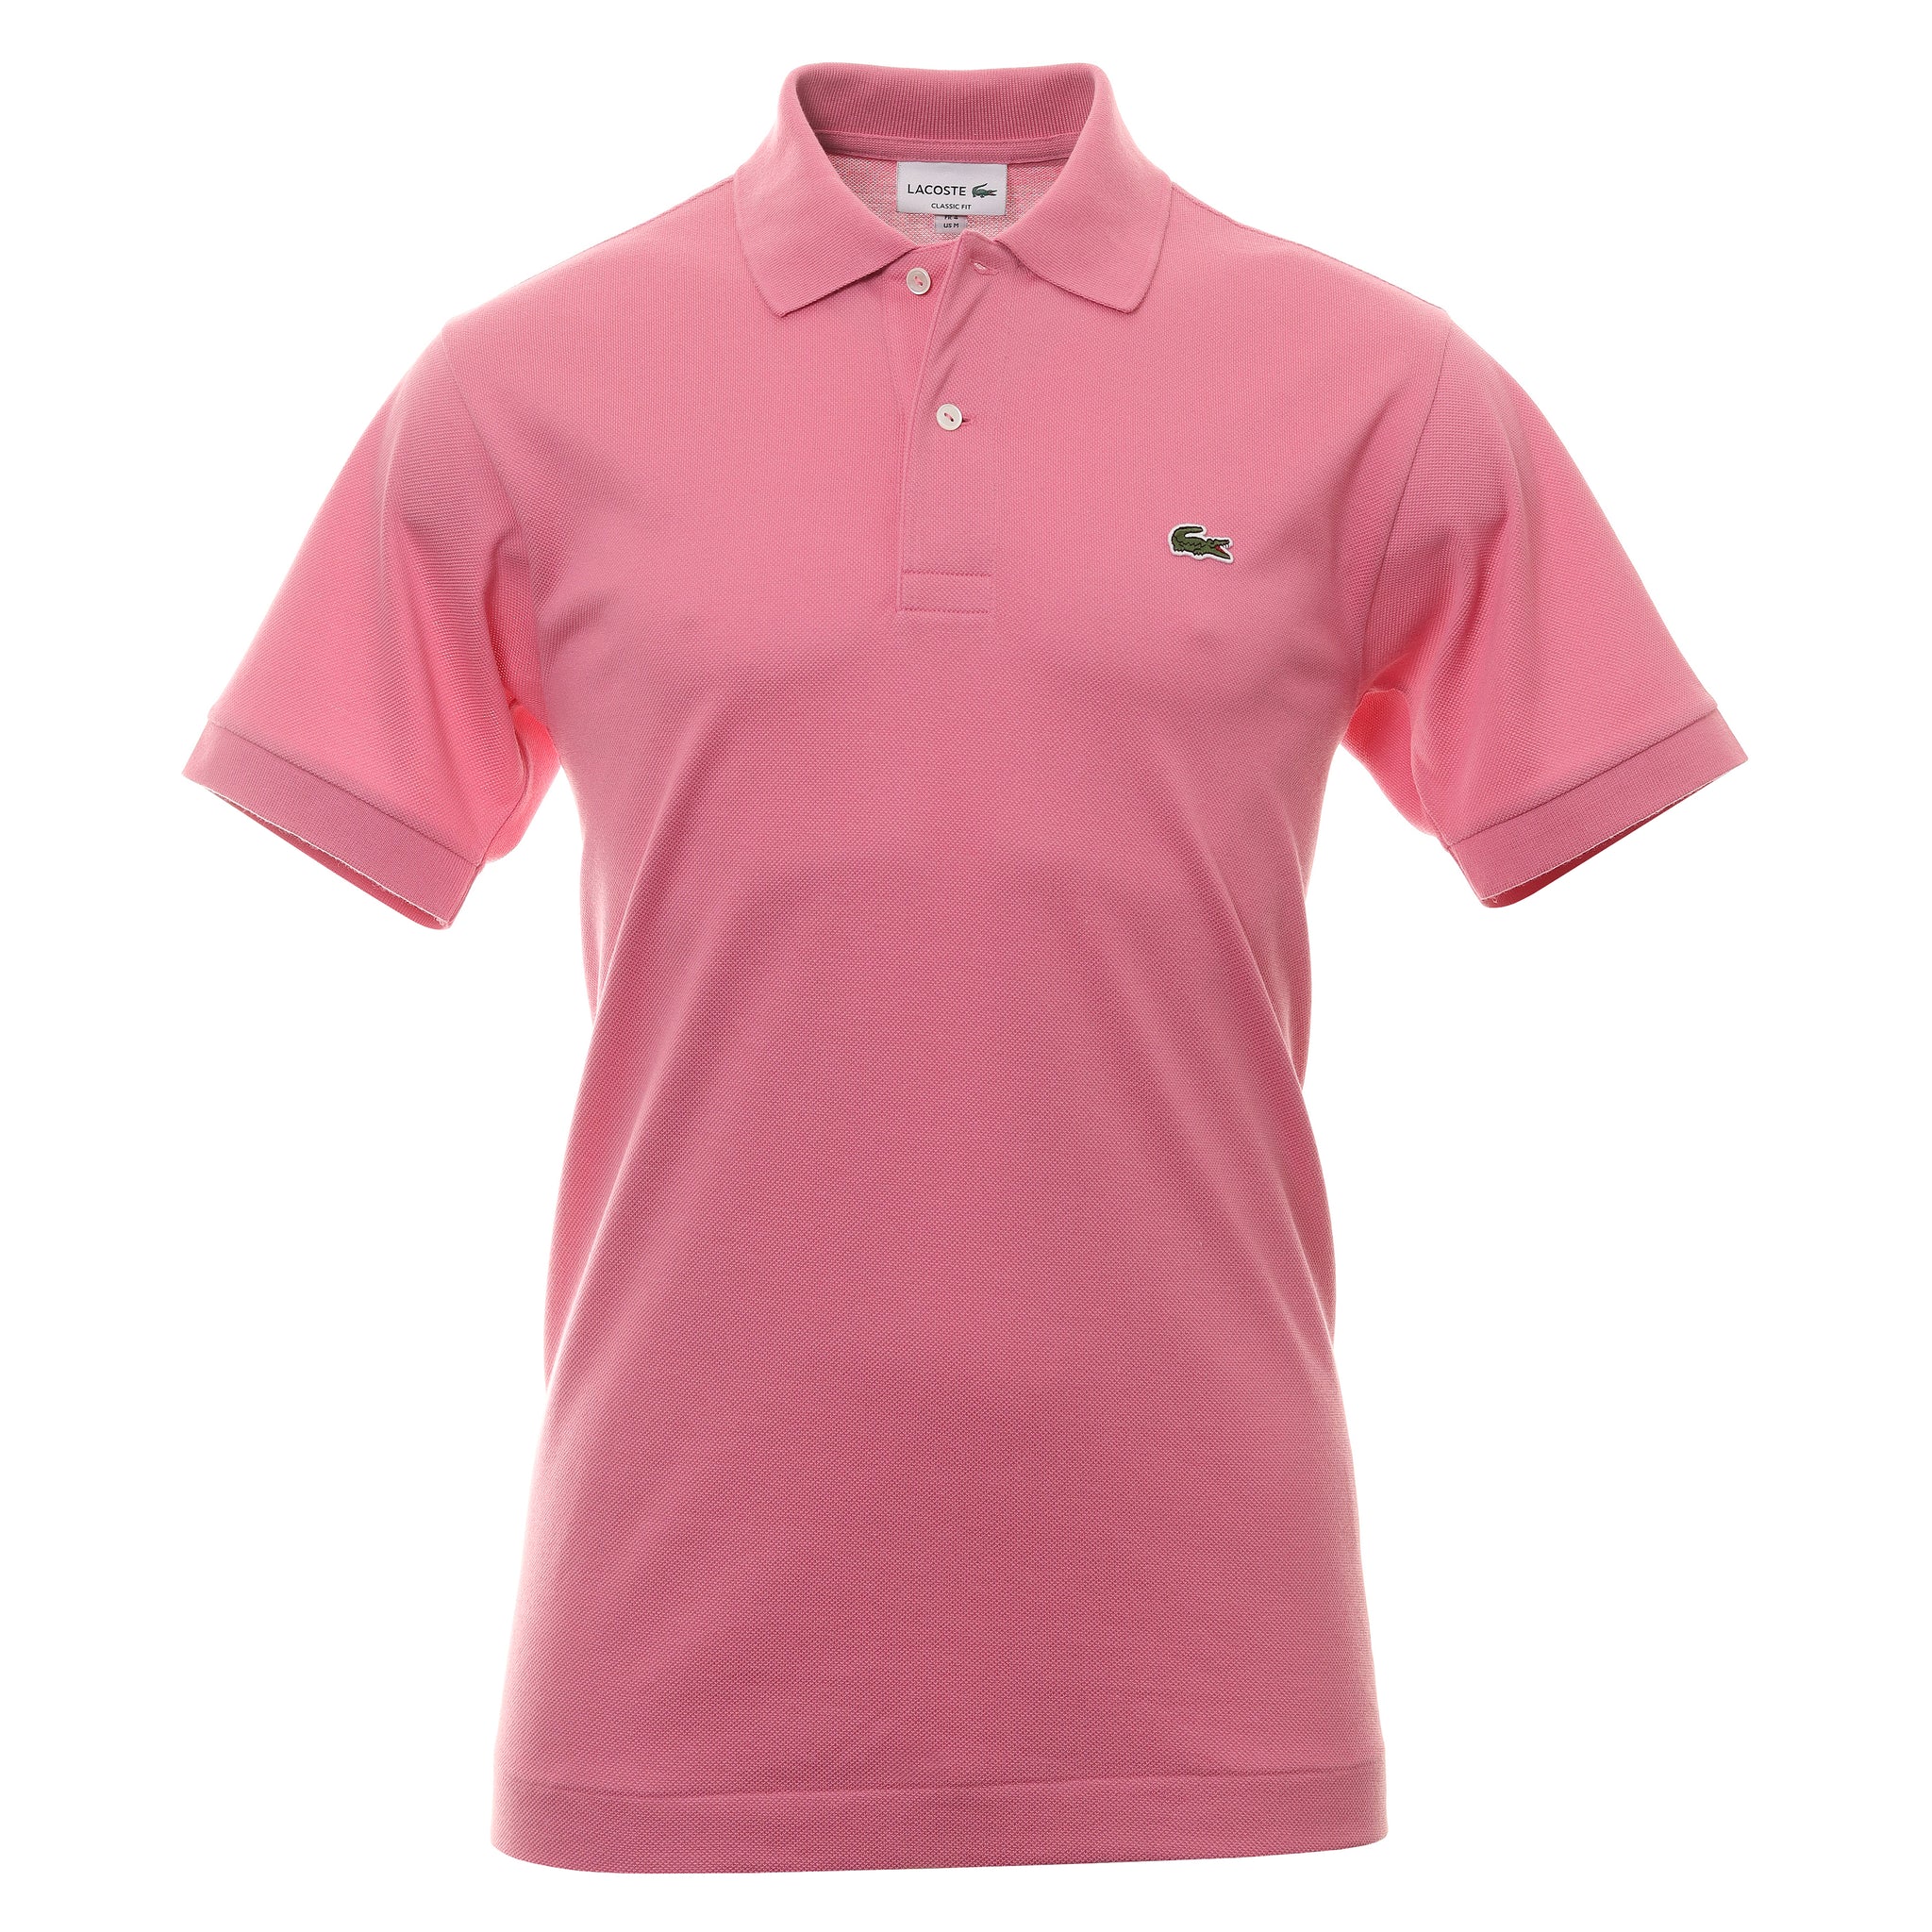 Lacoste Classic Pique Polo Shirt L1212 Reseda Pink 2R3 | Function18 ...